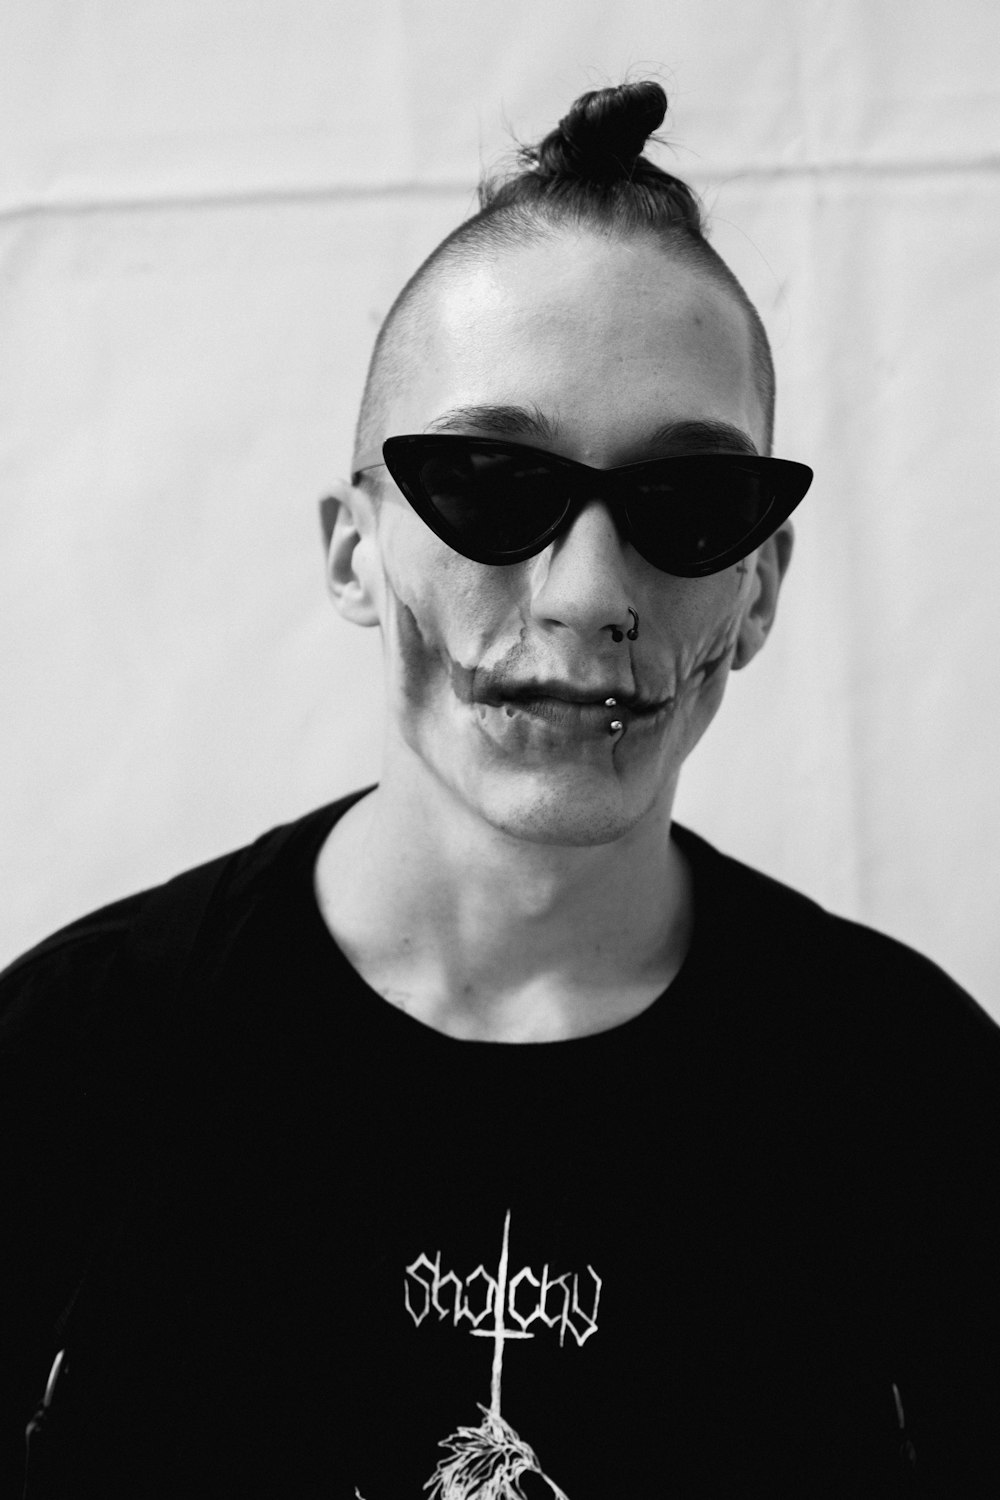 grayscale portrait photography of man wearing sunglasses